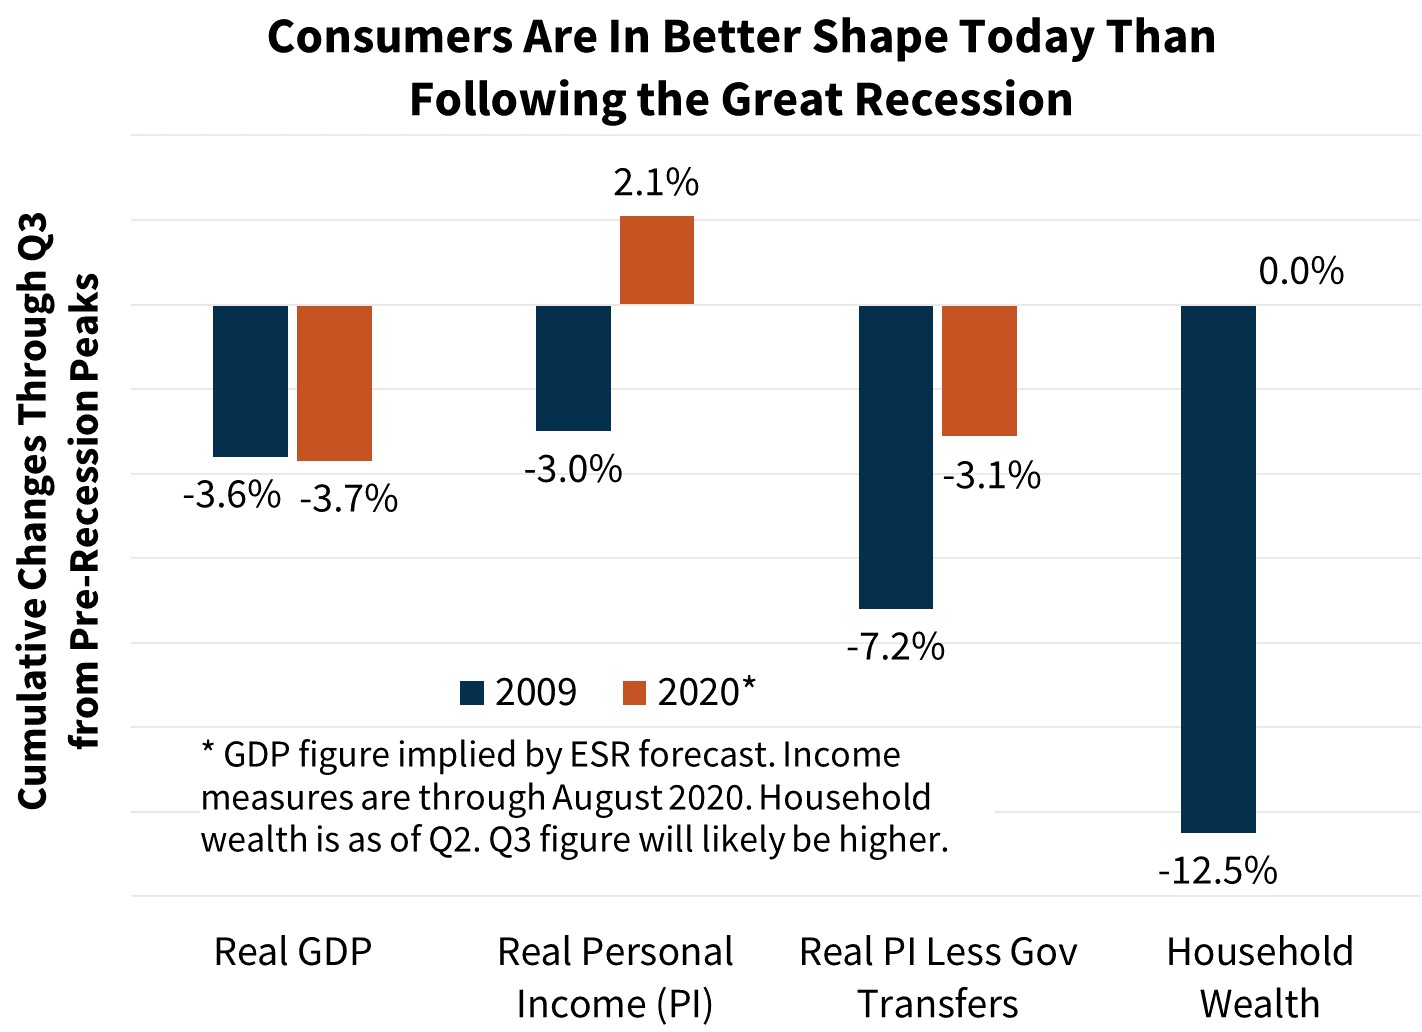  Consumers Are In Better Shape Today Than Following the Great Recession
 